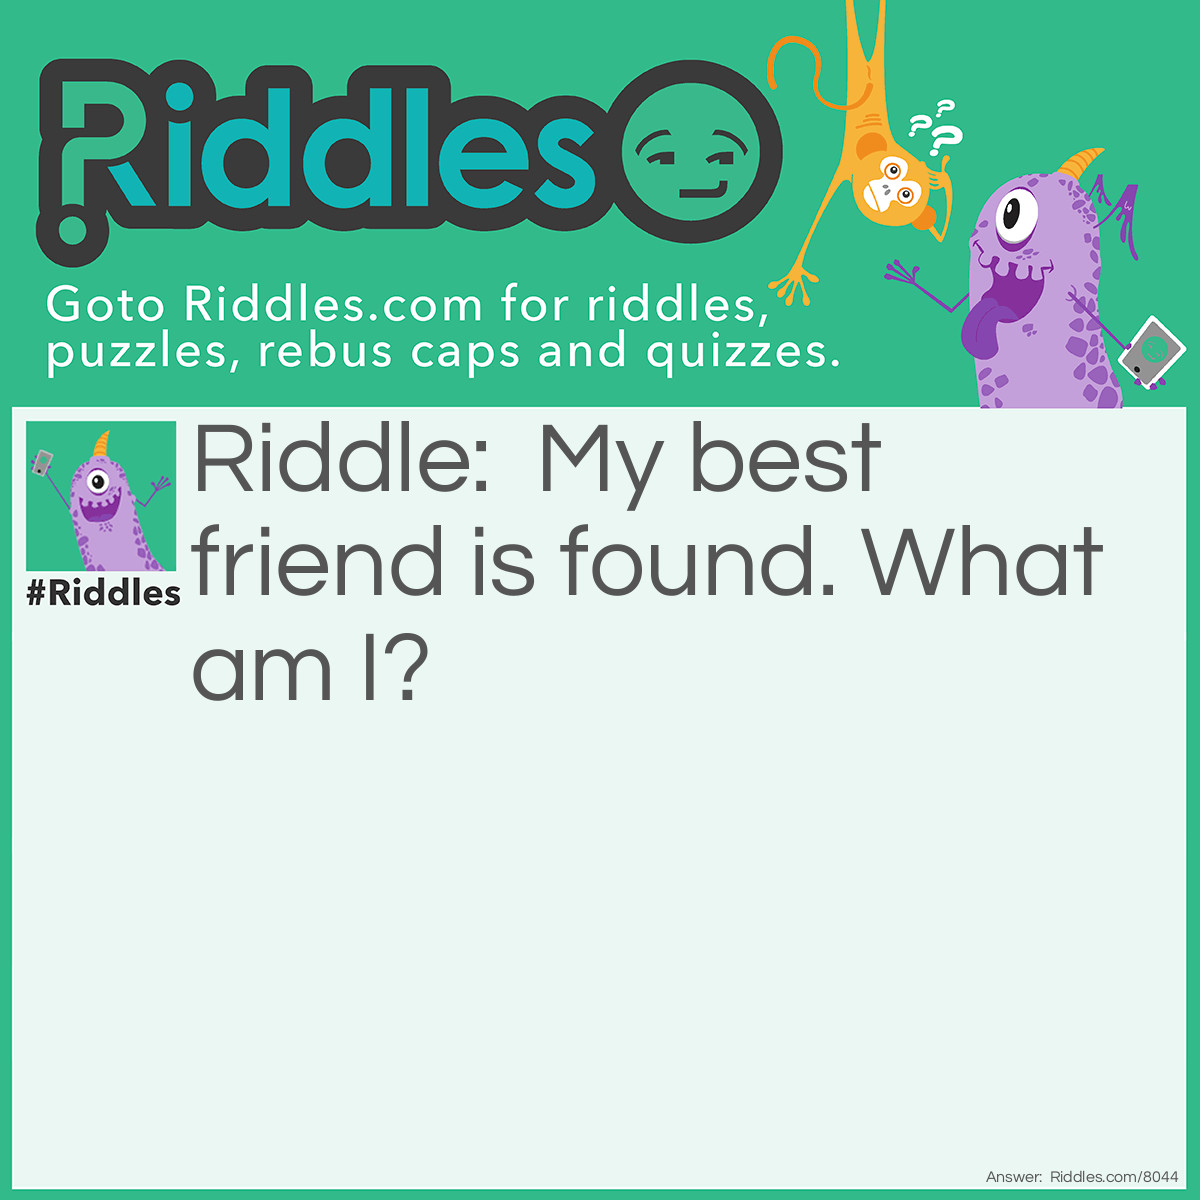 Riddle: My best friend is found. What am I? Answer: Lost